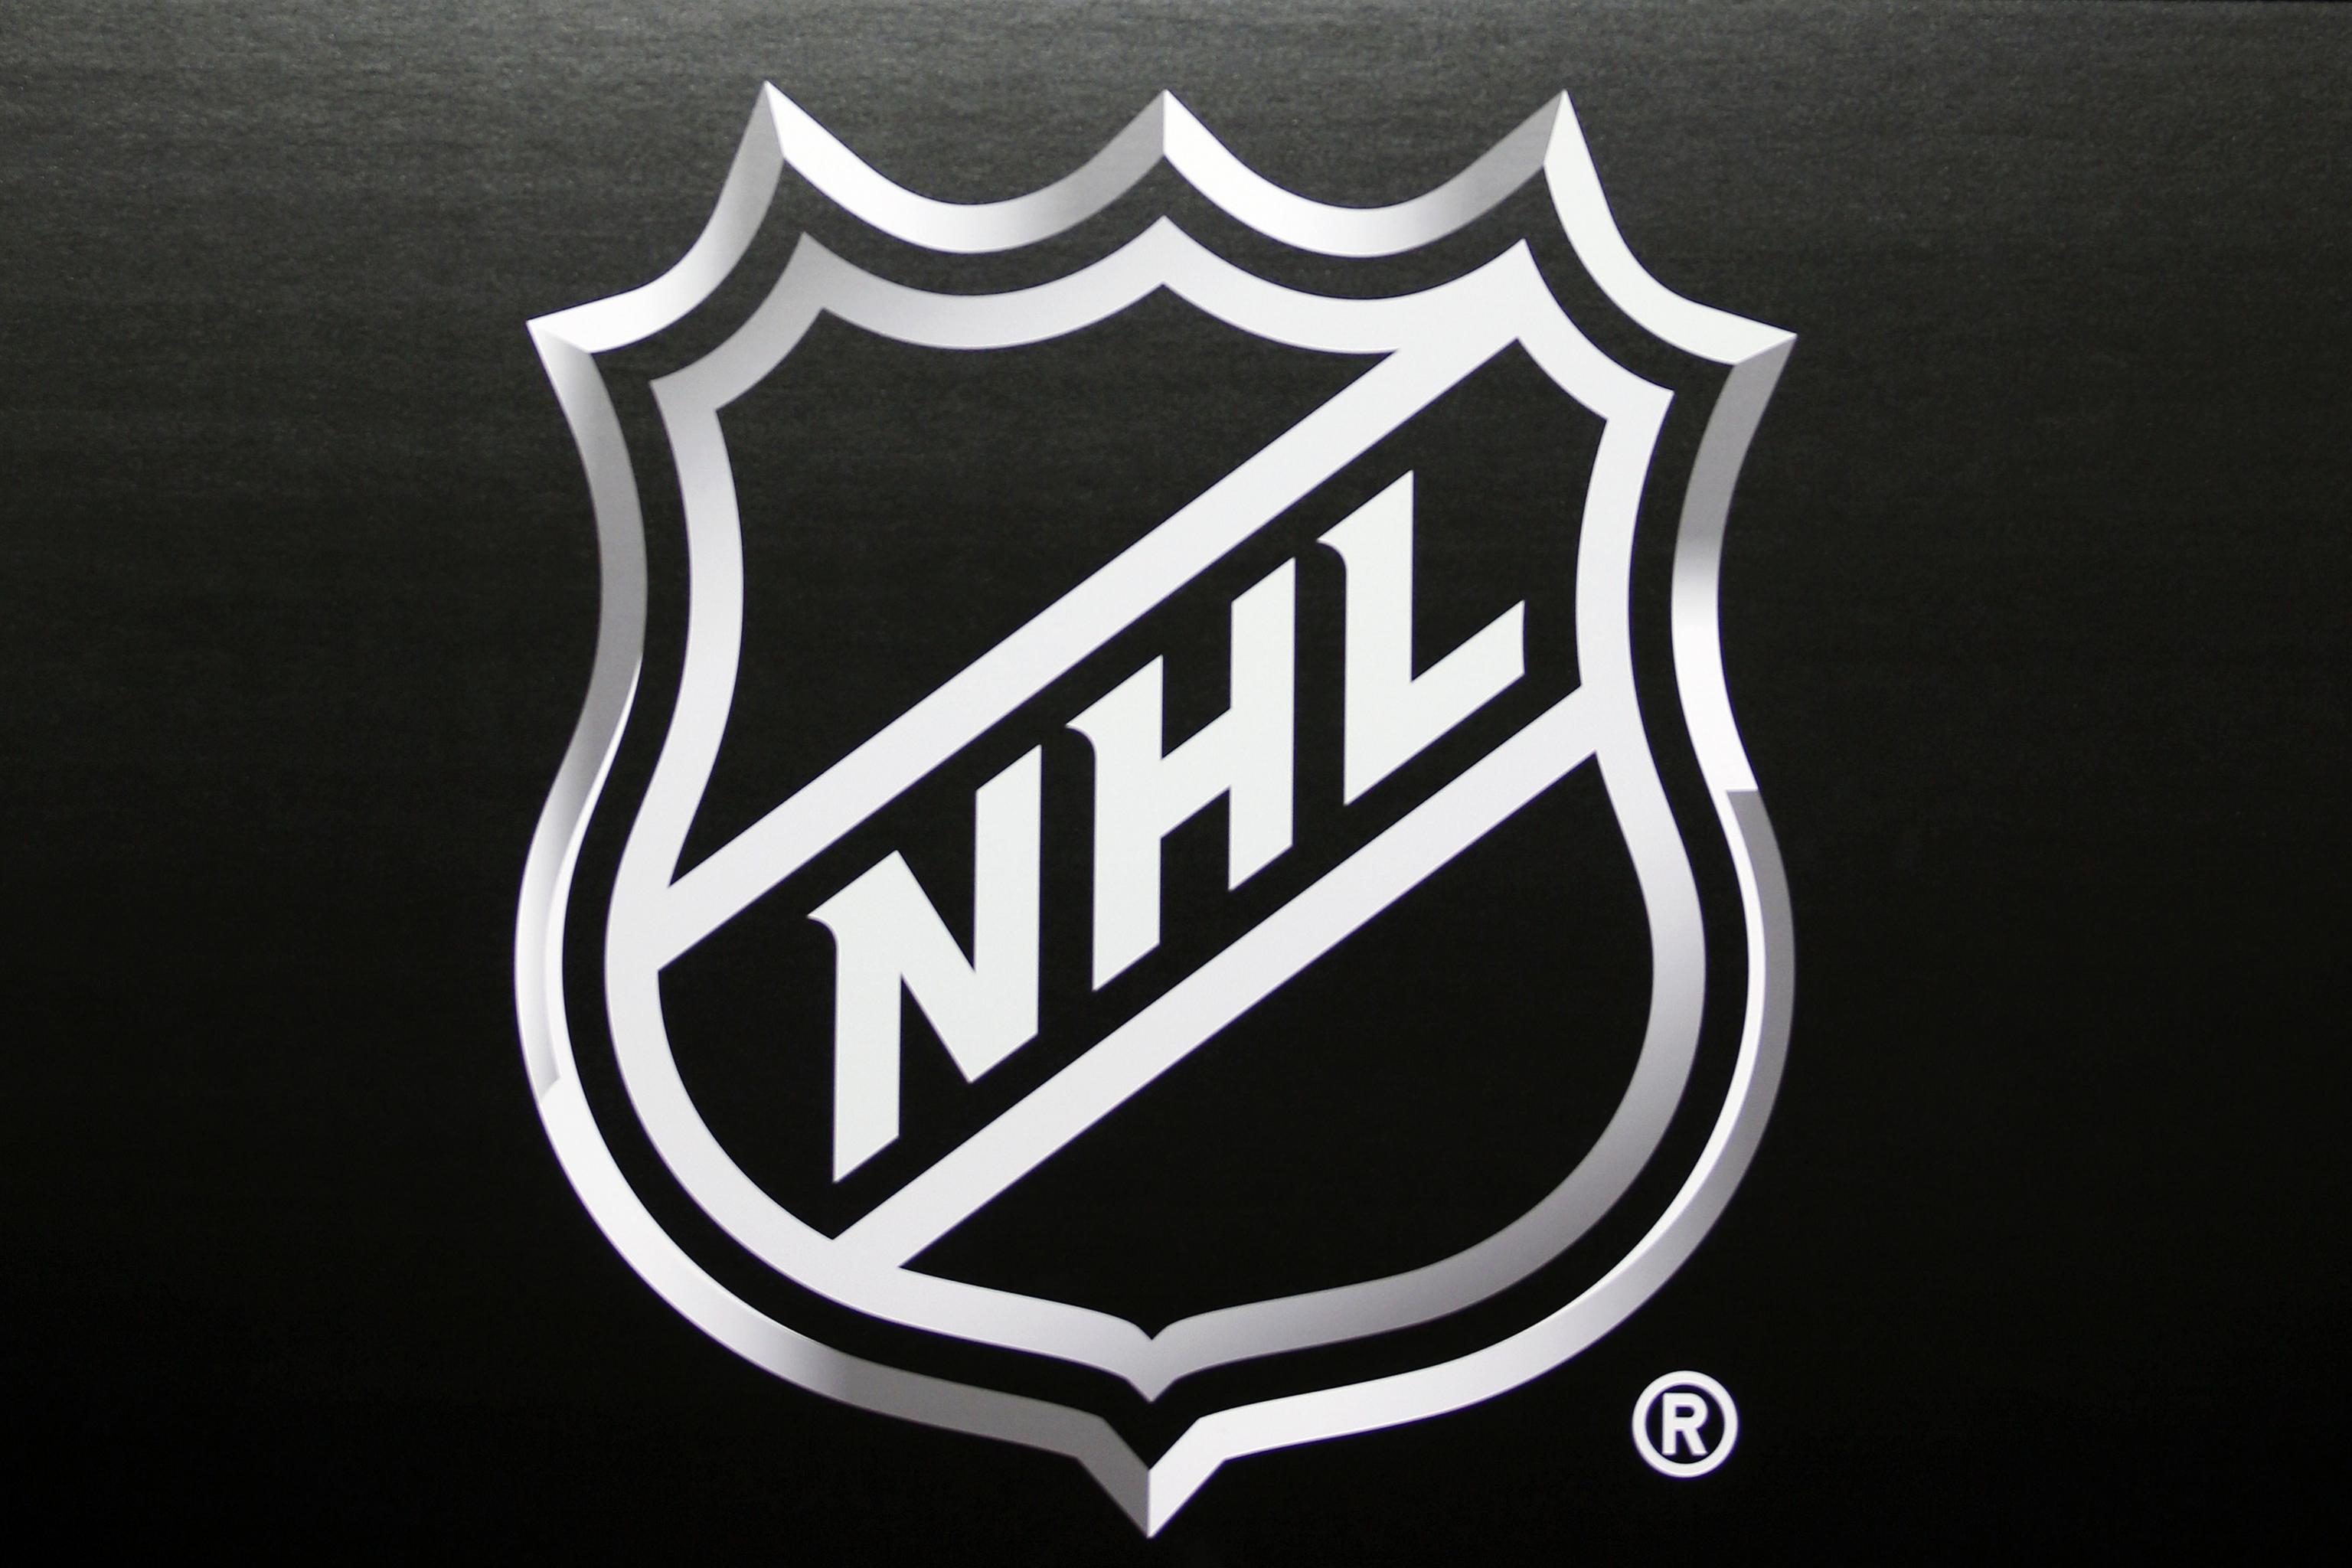 NHL Public Relations on X: ICYMI: The @NHL announced plans for